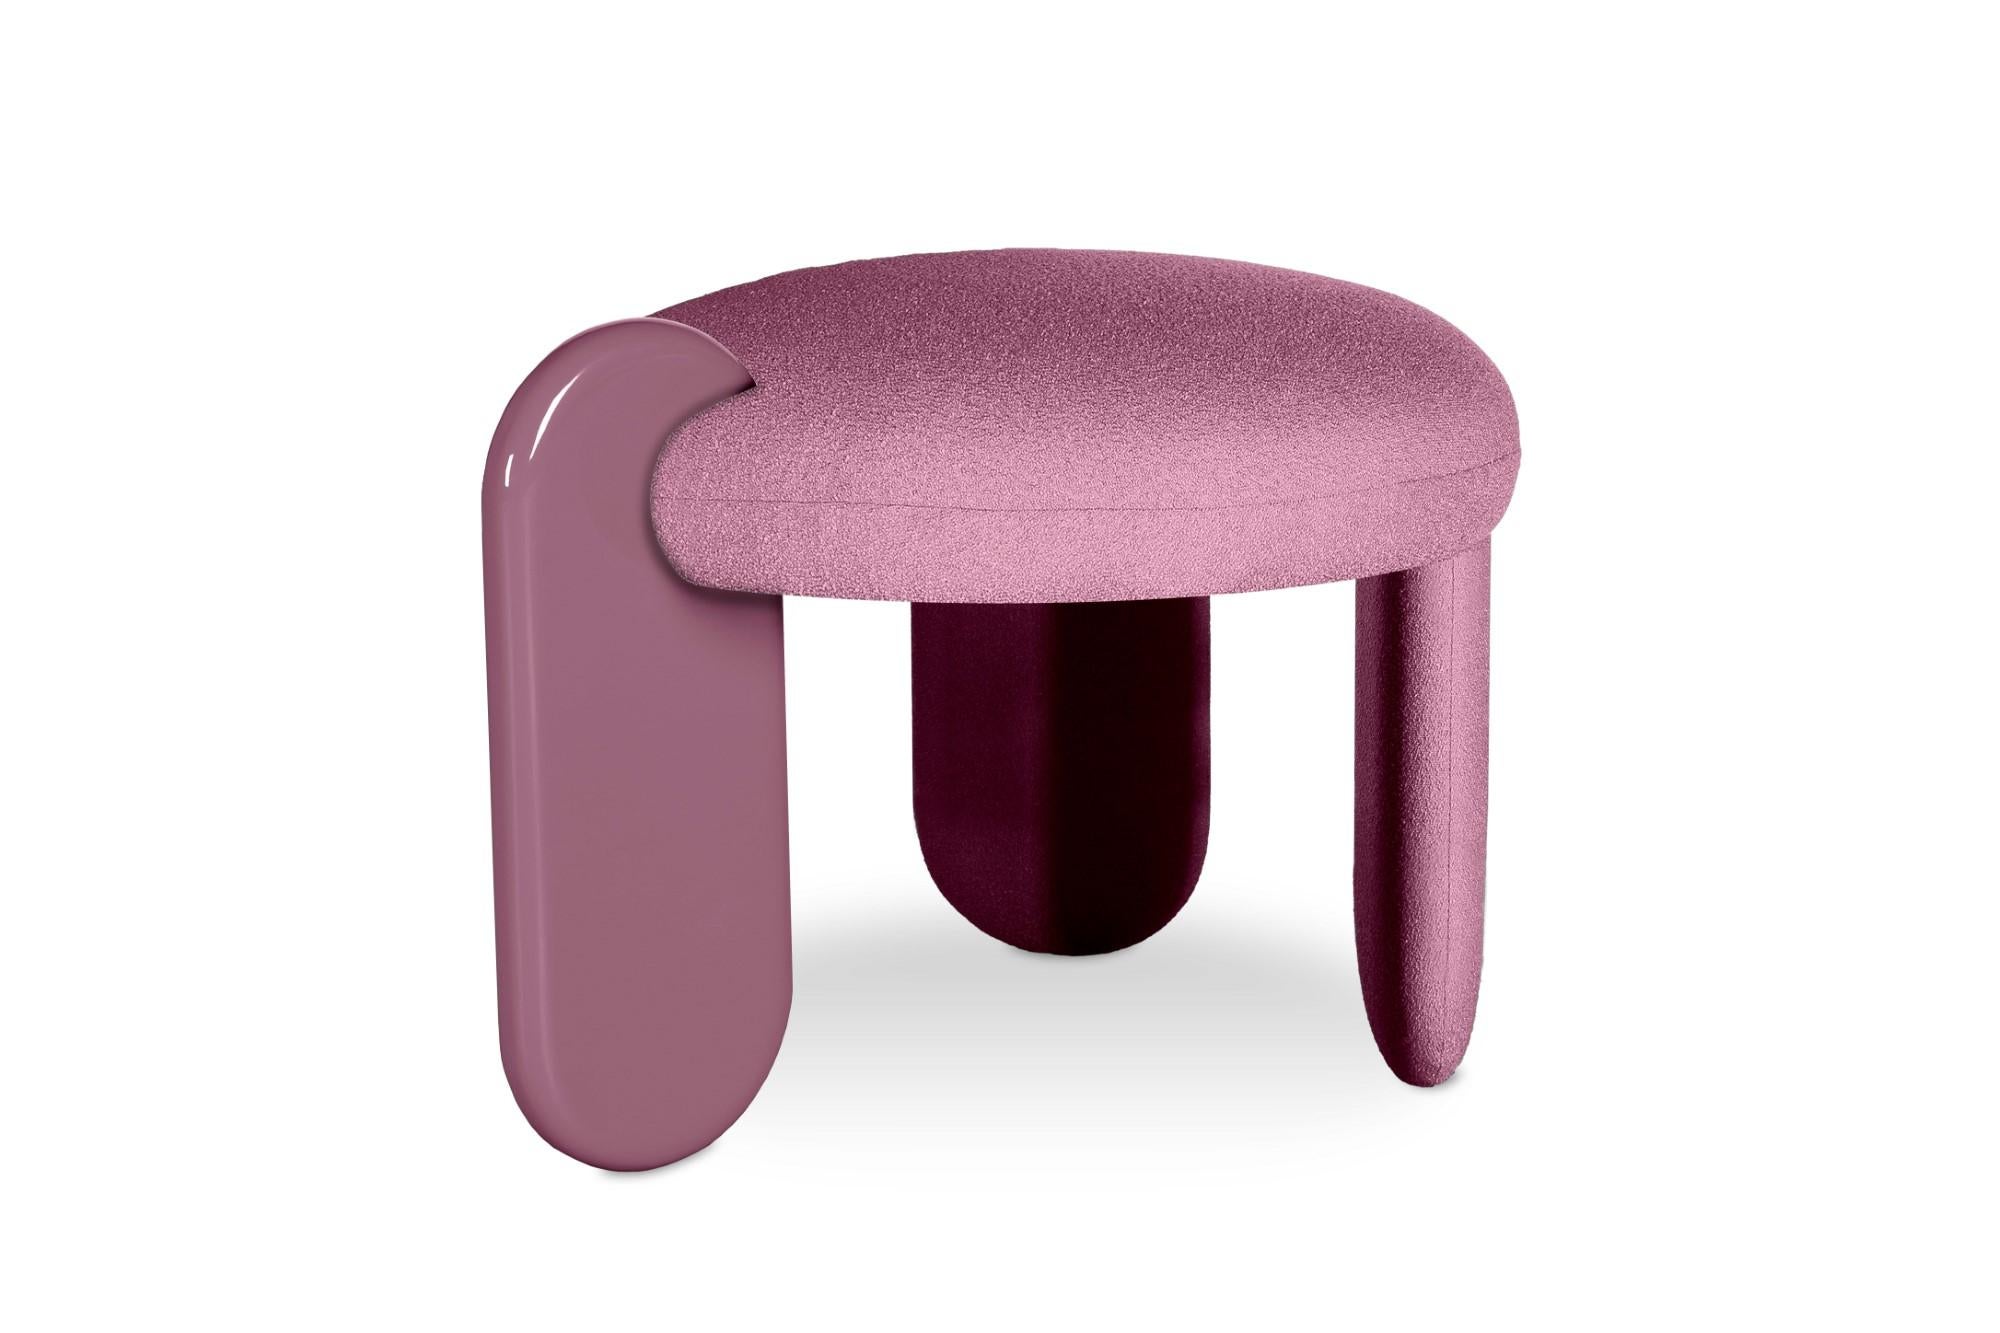 Glazy stool by Royal Stranger
Dimensions: Width 68.5cm, height 50cm, depth 60cm
Materials: Solid wood frame, foam, upholstery.
Tamaris color from the Fabrics Main Collection LAGO.
Also available in other leg colors, Royal Stranger’s fabrics and